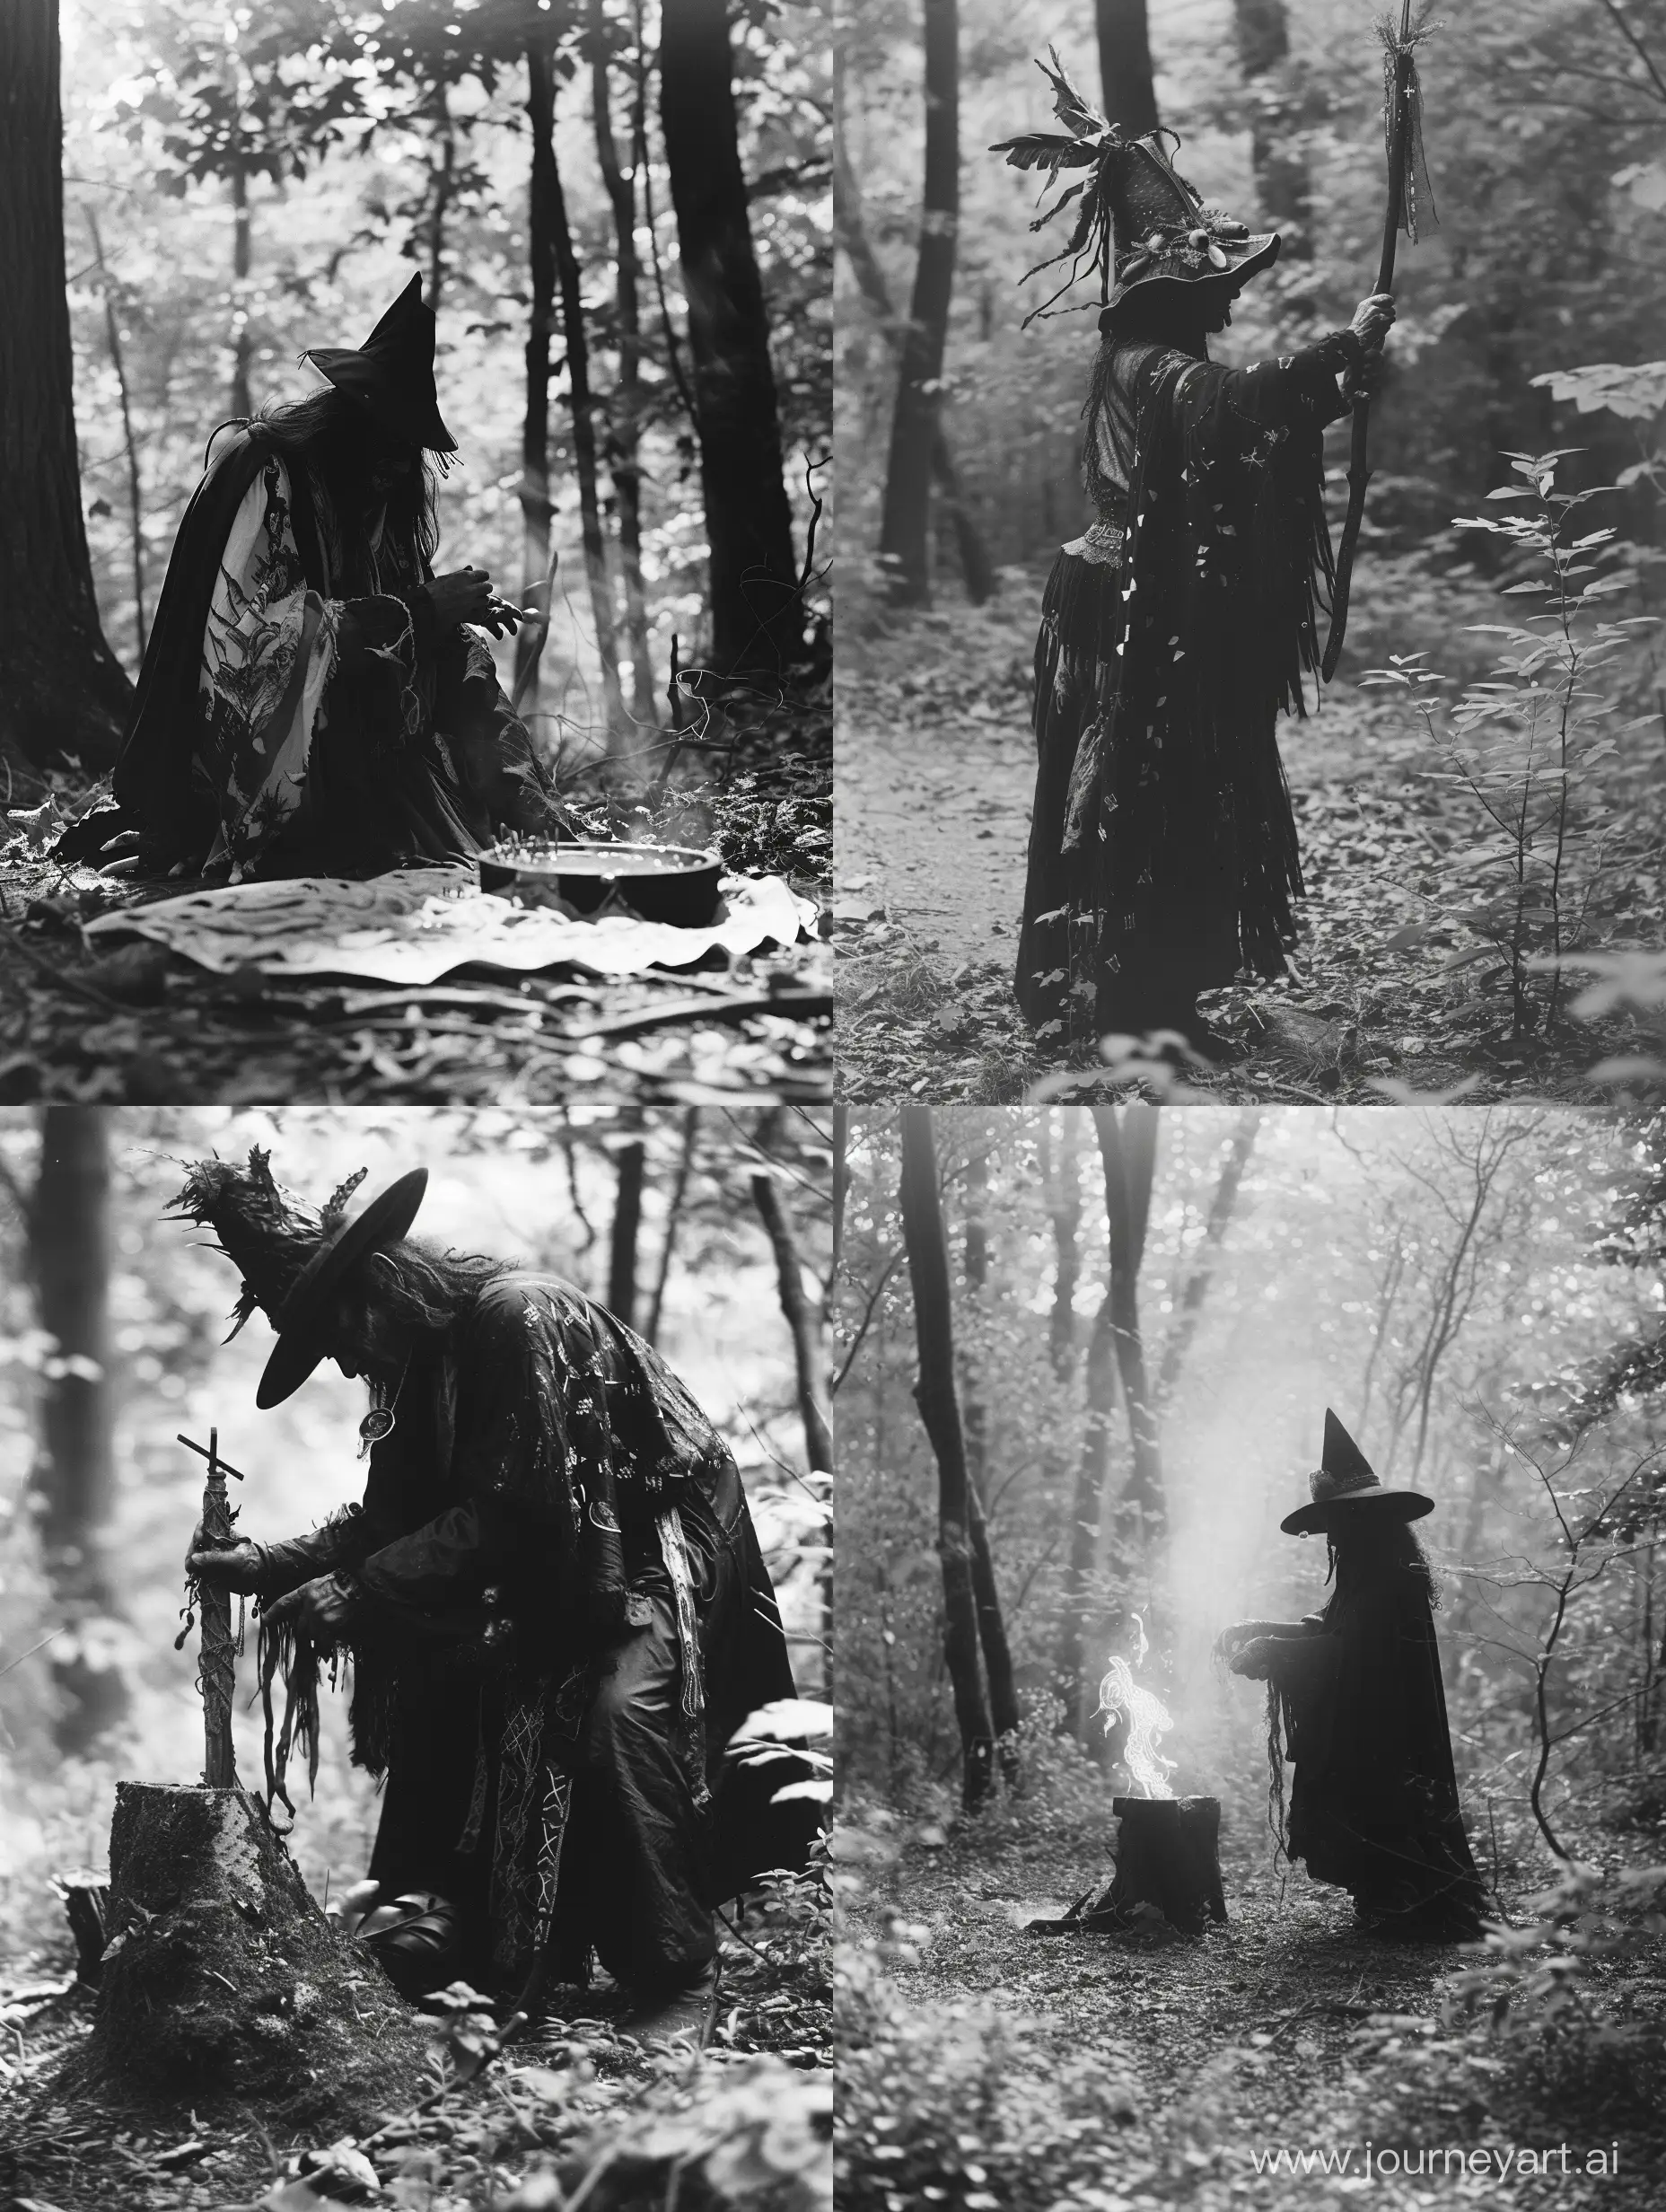 Grayscale photo that evokes folk horror. Baron samedi in an eerie forest performing a mysterious voodoo ritual, folk lore, folk horror, witch core, photo taken on provia 